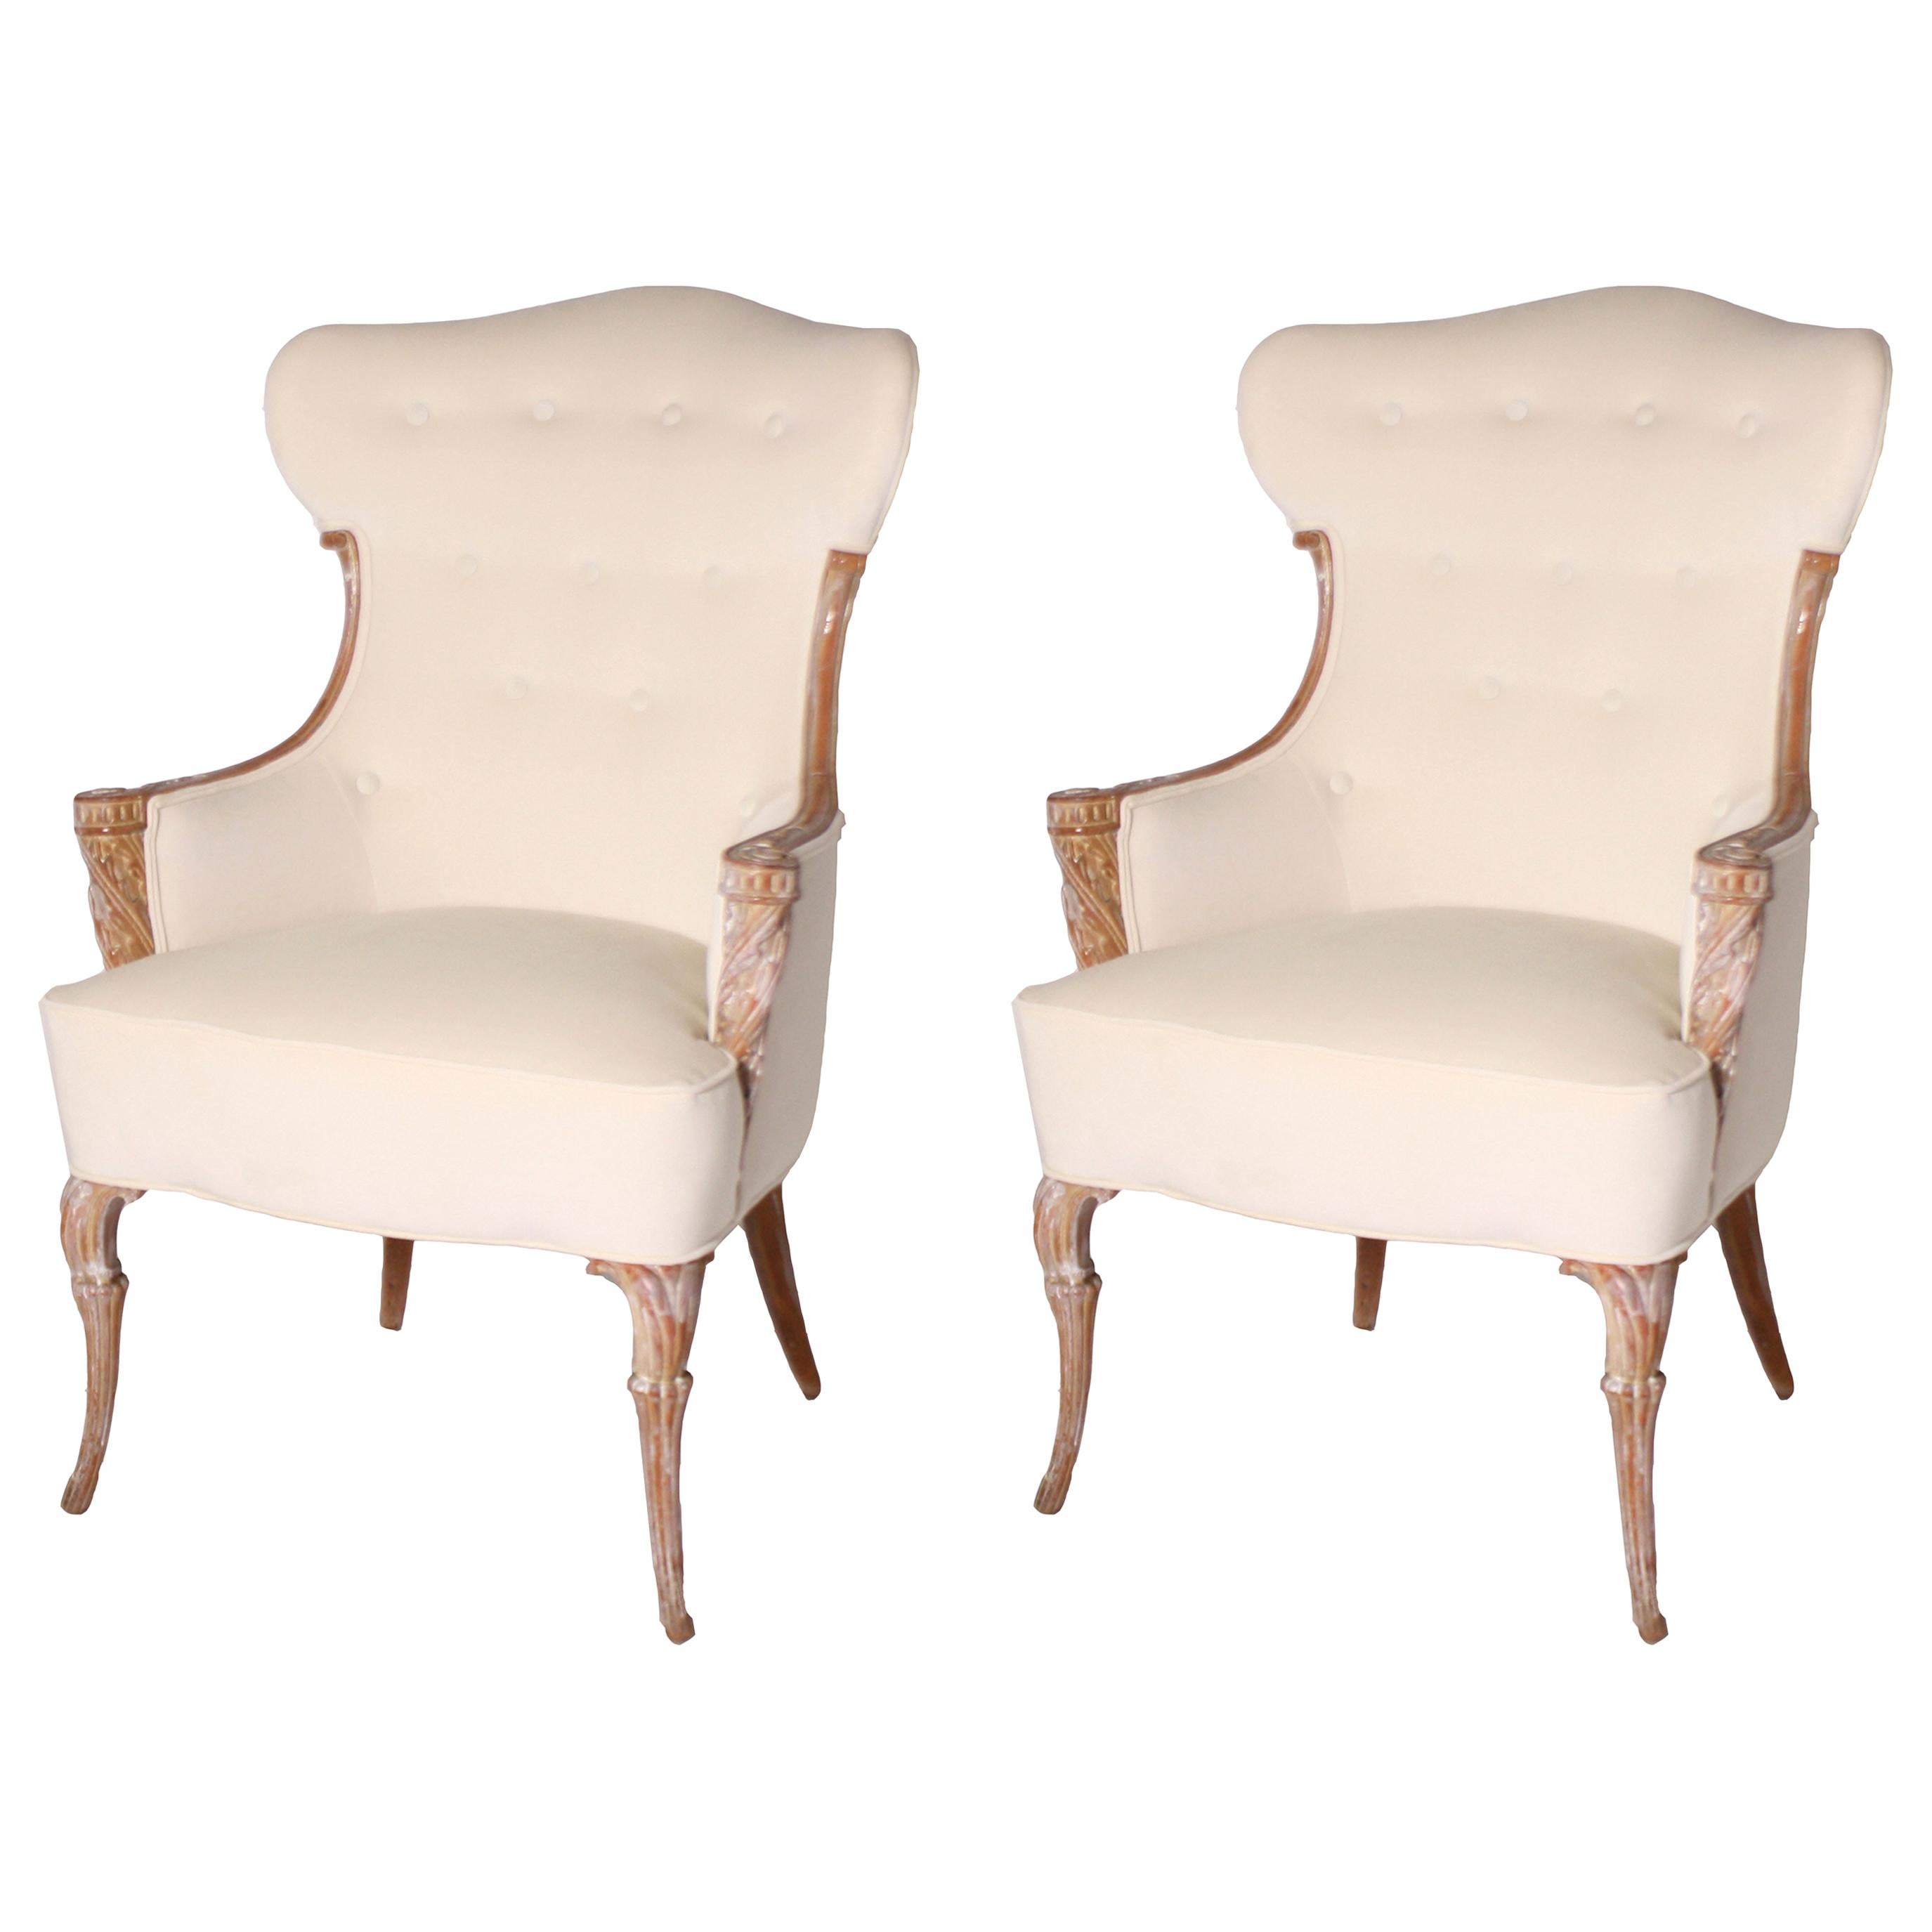 Pair of Tufted Chairs, circa 1940